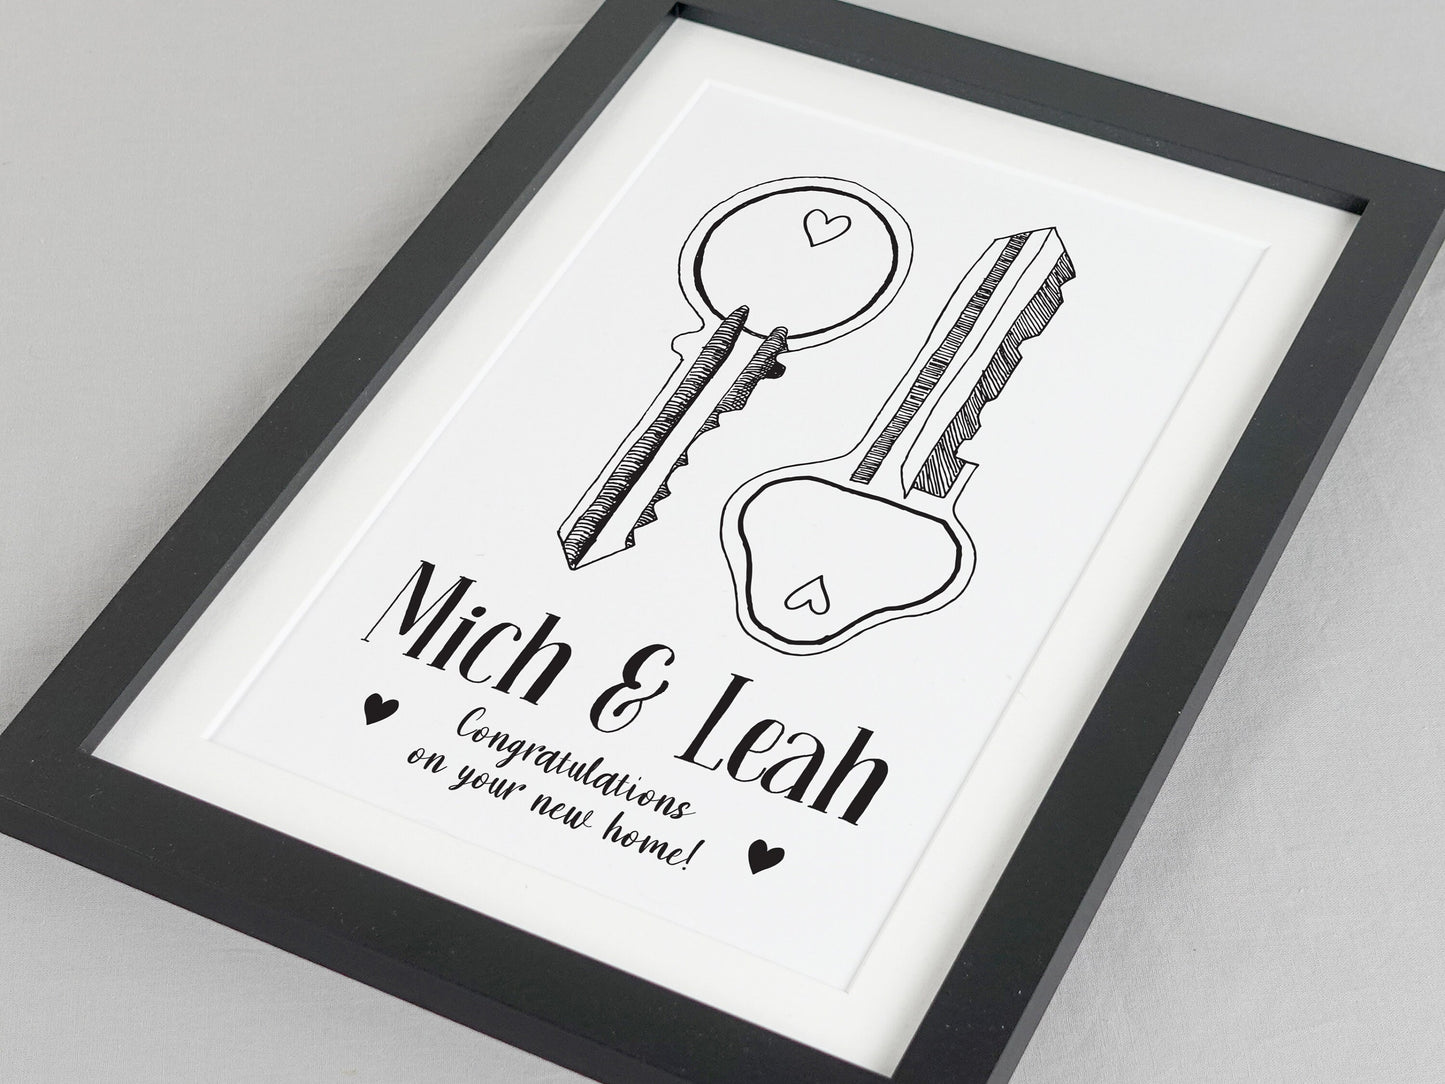 Keys to New Home Print | Housewarming Gift | Moving In Present | Couples Home Gift | Black and White Home Print VA179